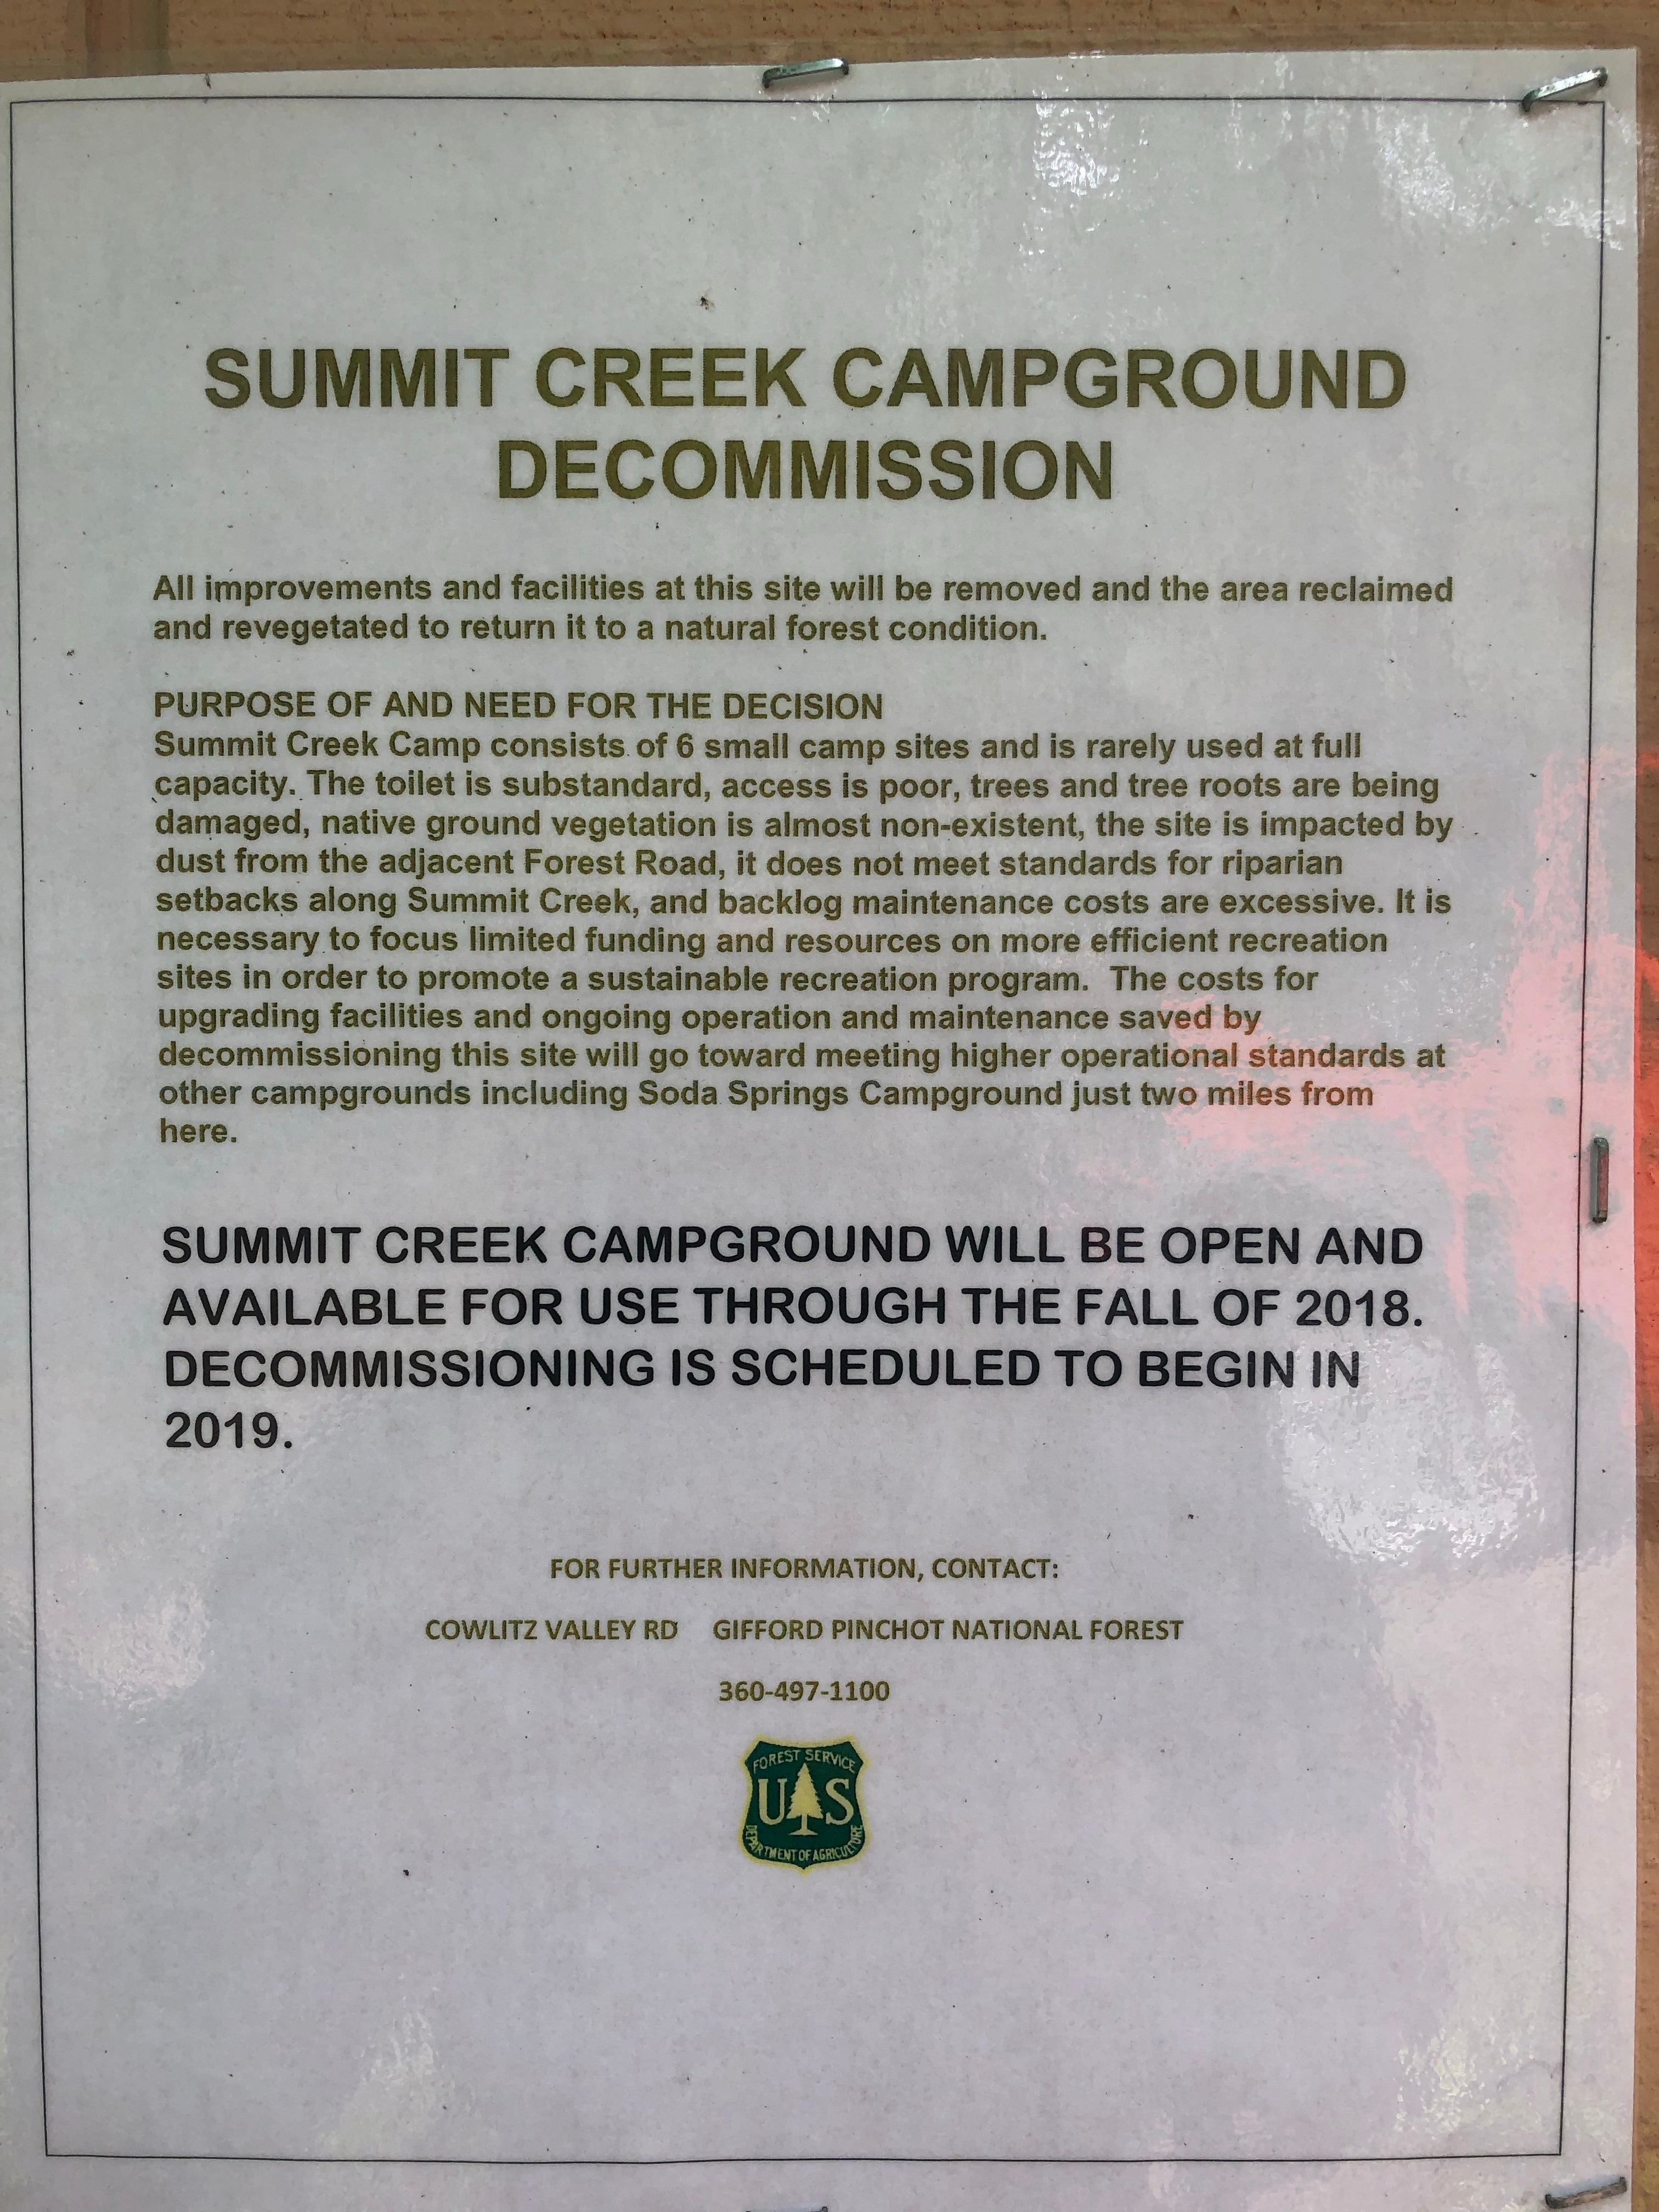 Camper submitted image from Summit Creek - 4